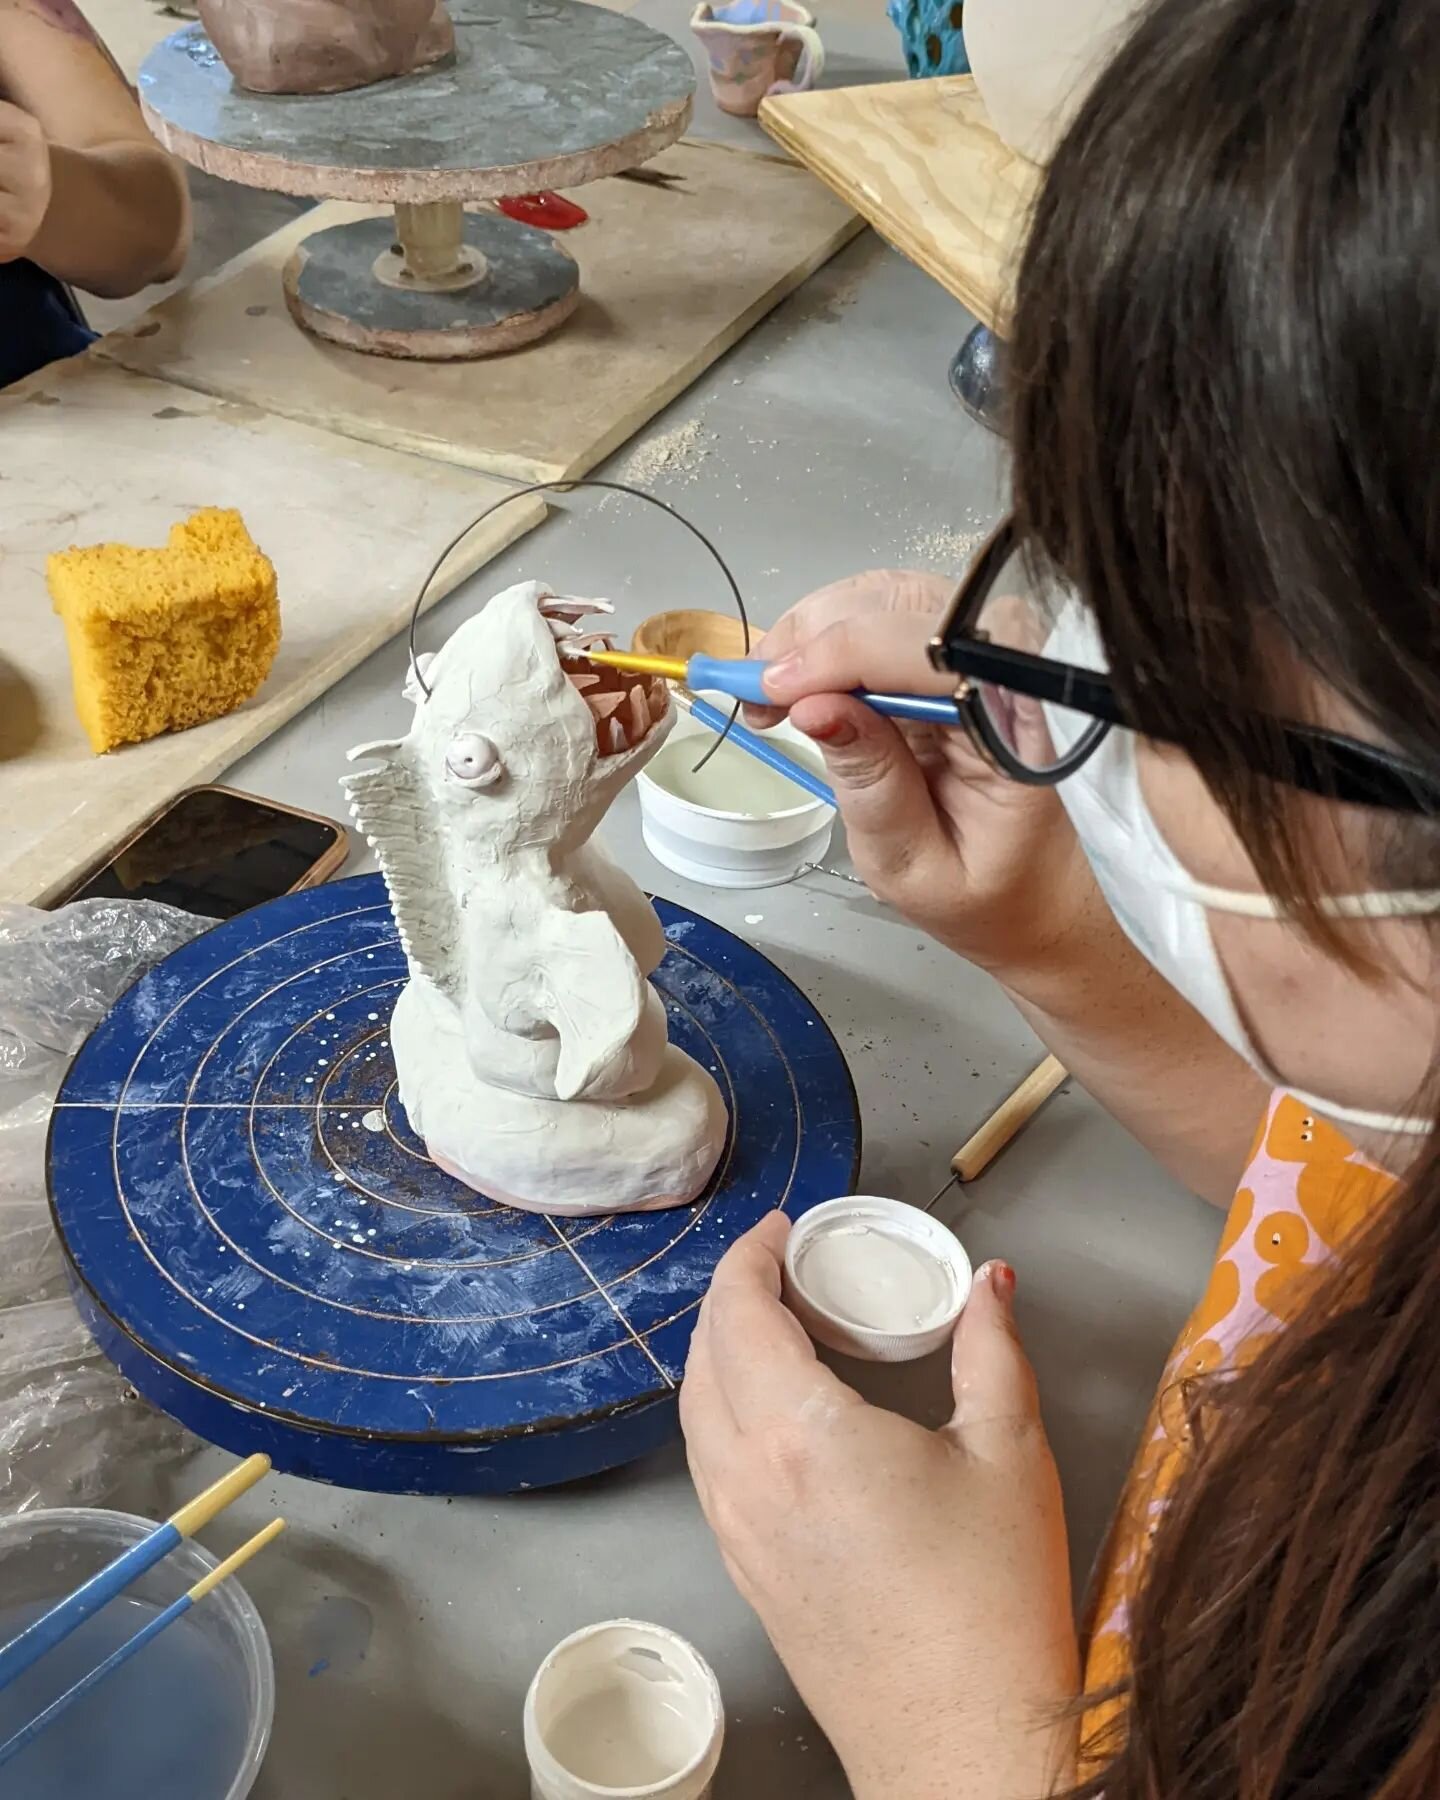 MY STUDENTS ARE AMAZING! Check out some of the work my students have been making this session at @claymakersarts!
.
.
I love teaching and would love to find more ways to do it! If you know anybody who needs a sculpture teacher, send them my way 🤗
.
